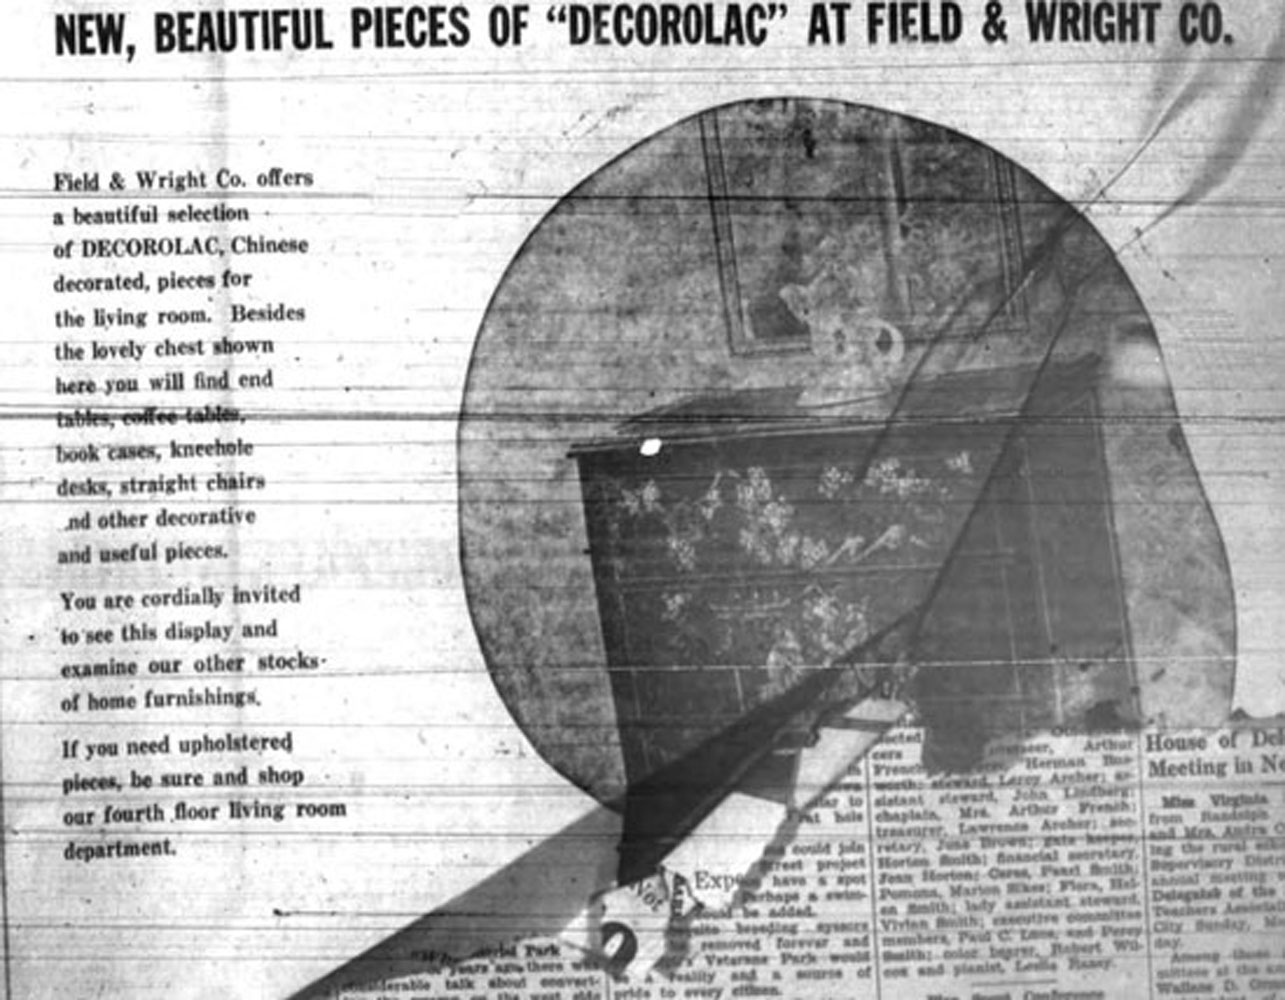 Decorolac for Field & Wright